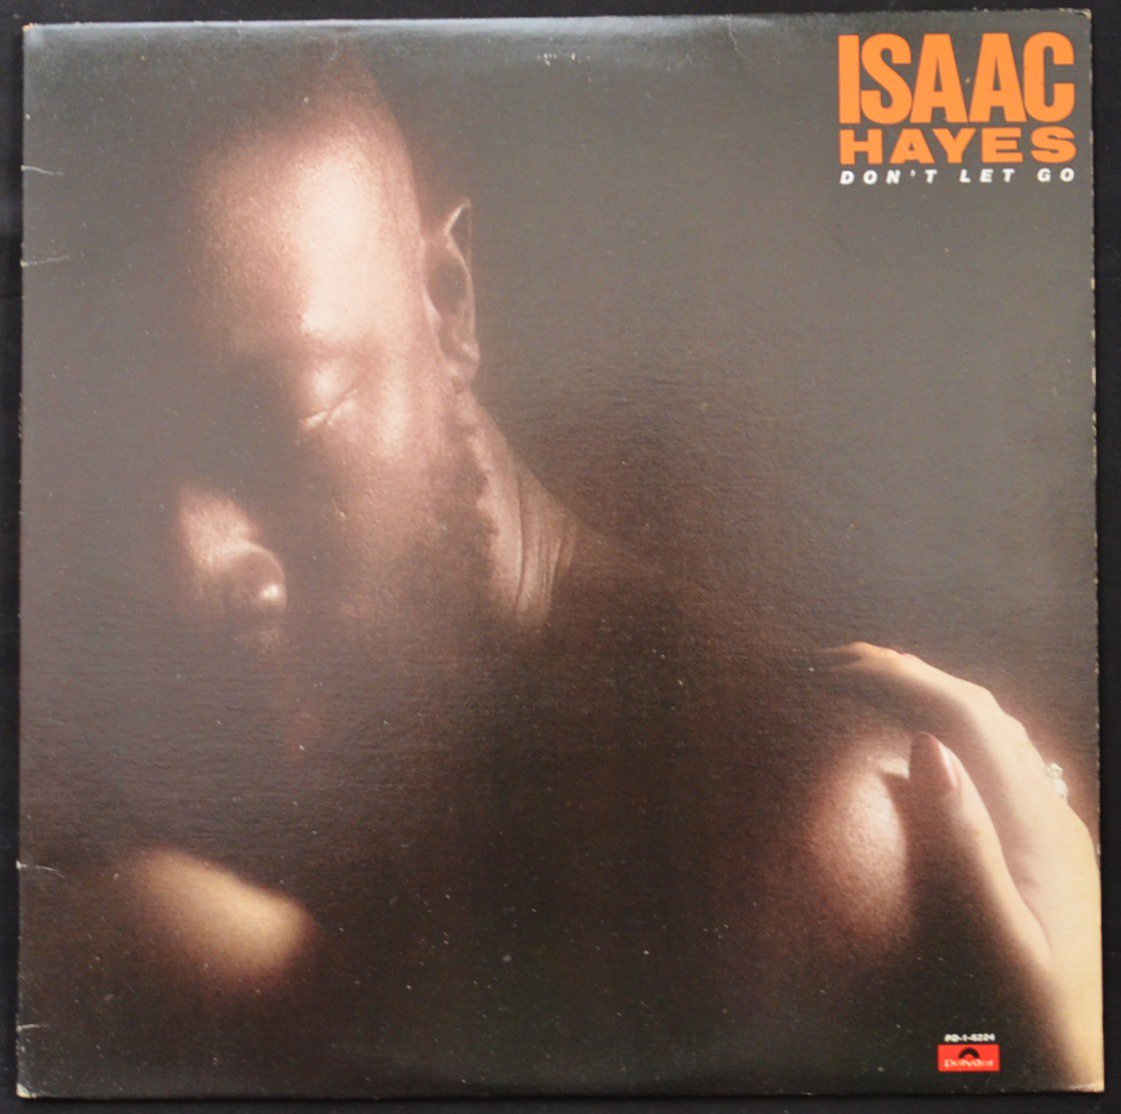 ISAAC HAYES / DON'T LET GO (LP)